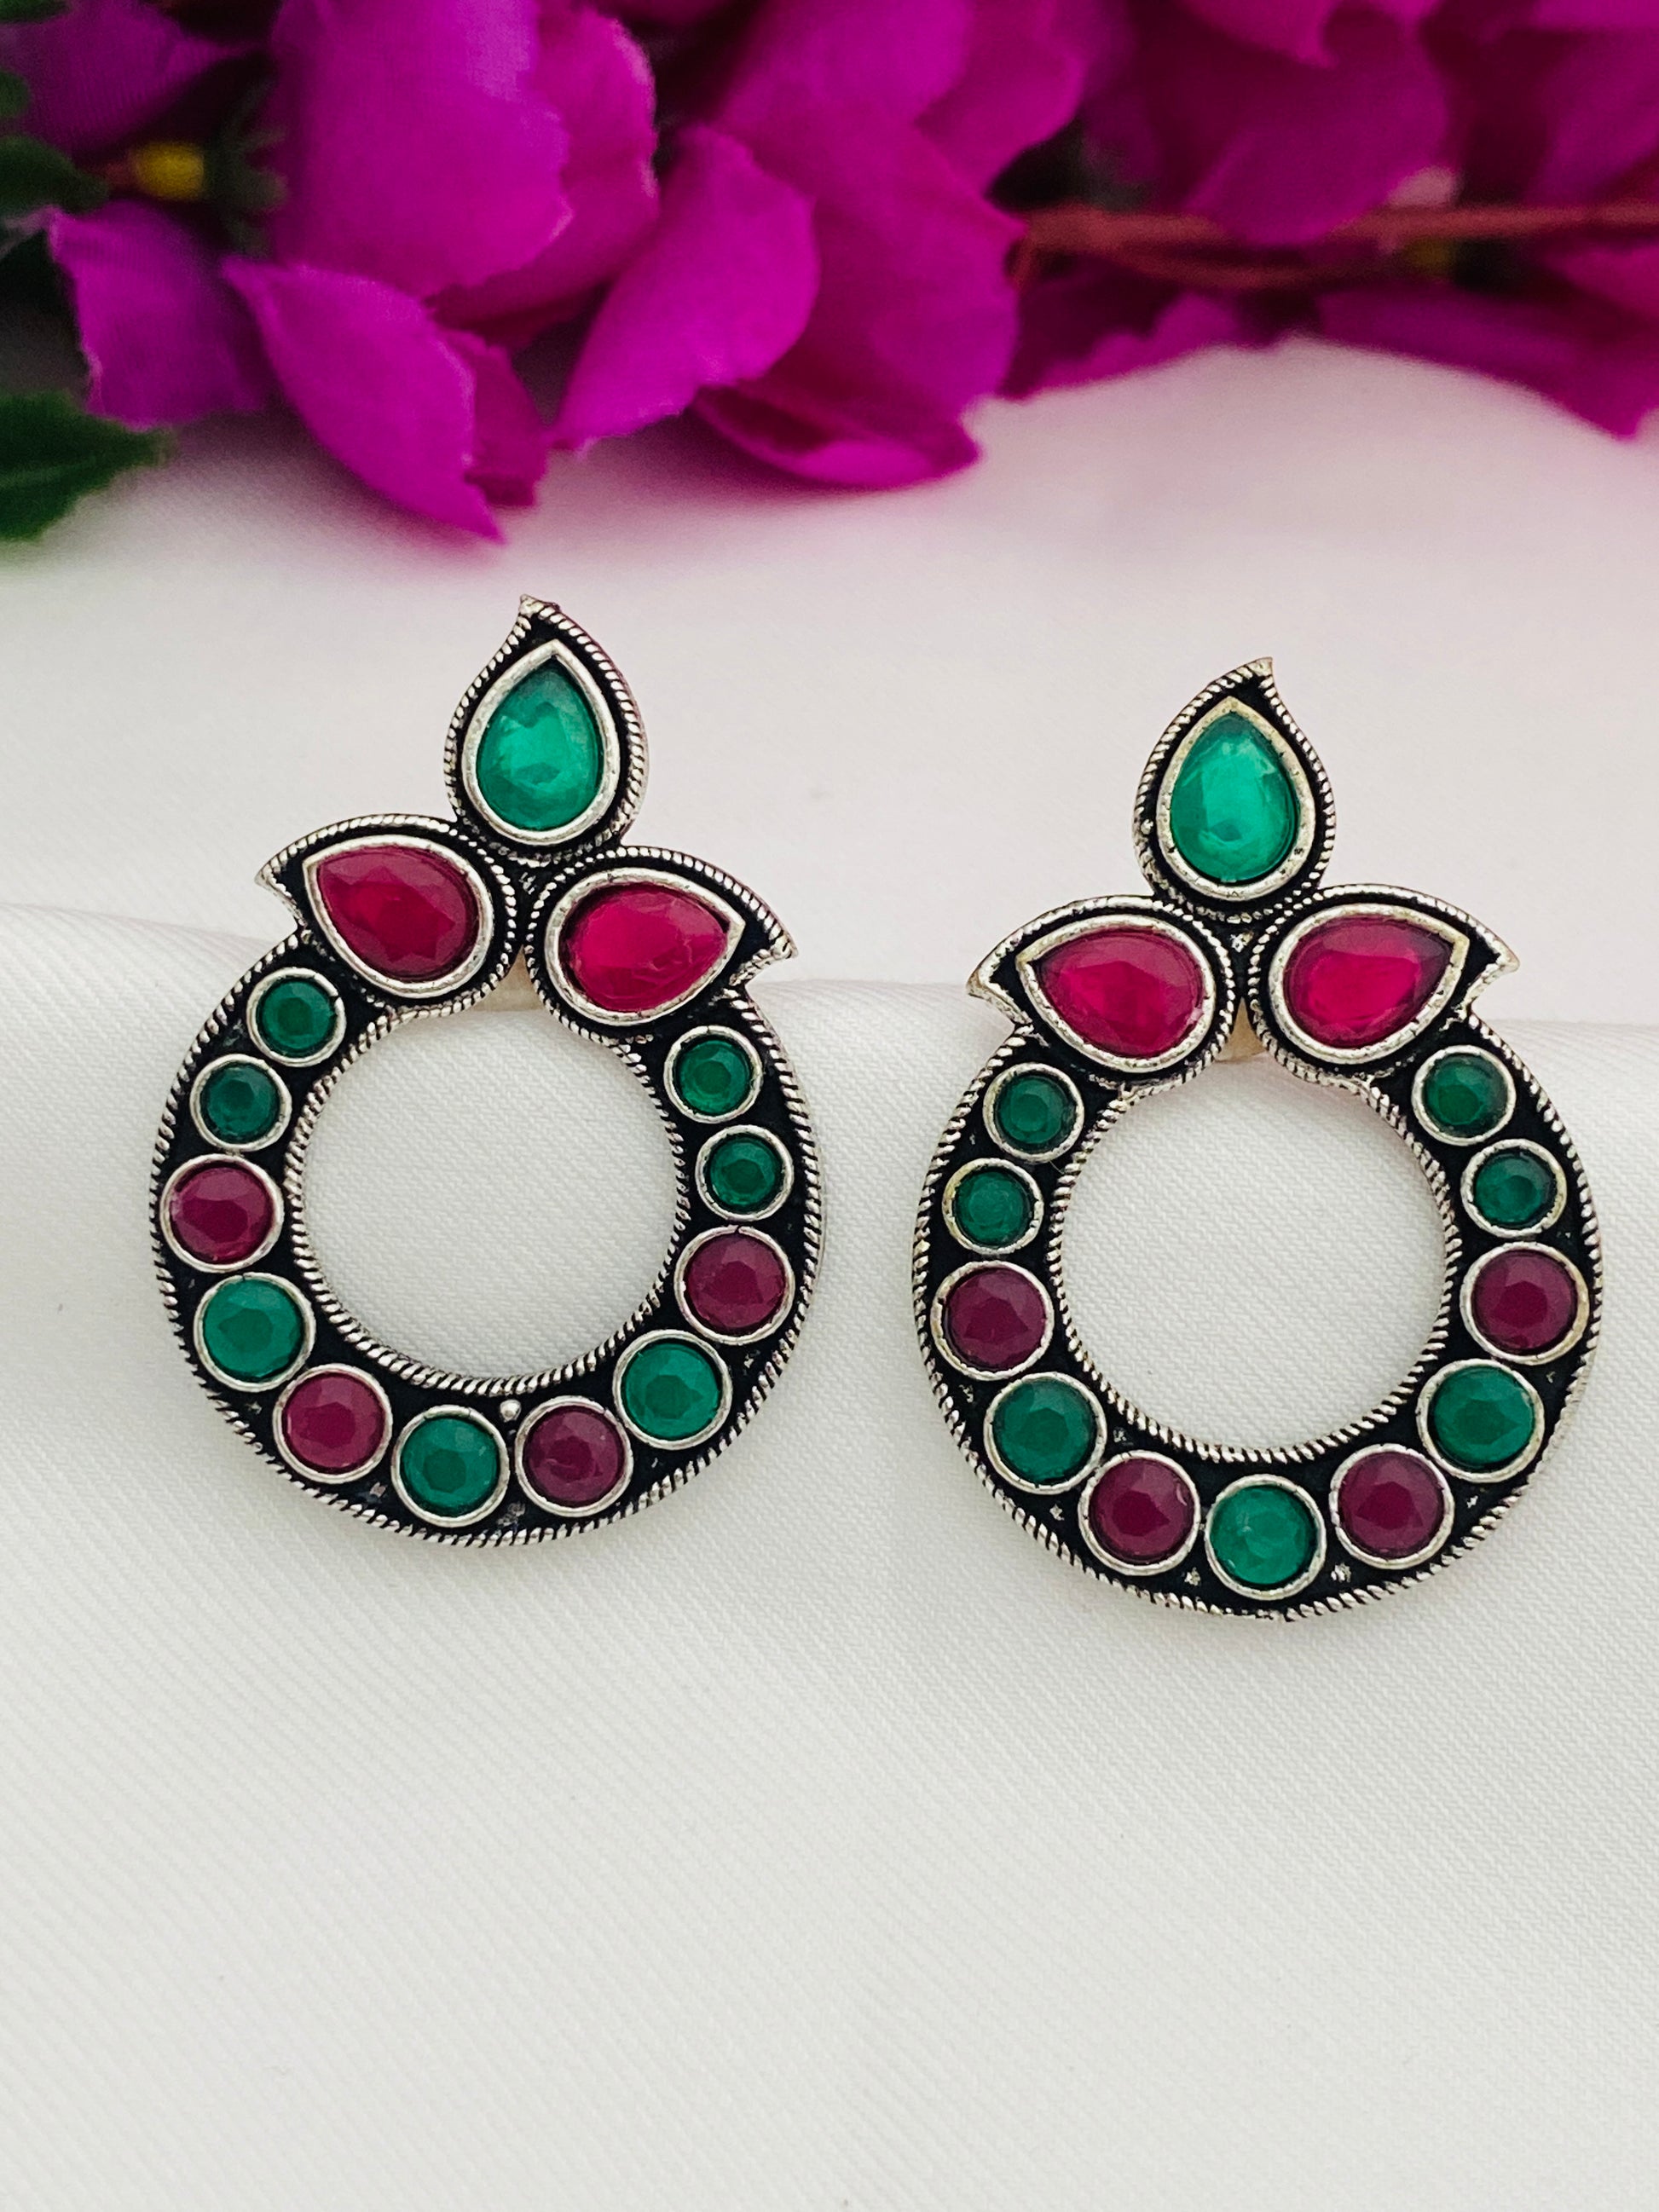 Attractive Multicolor Rounded Design Silver Oxidized Earrings For Women